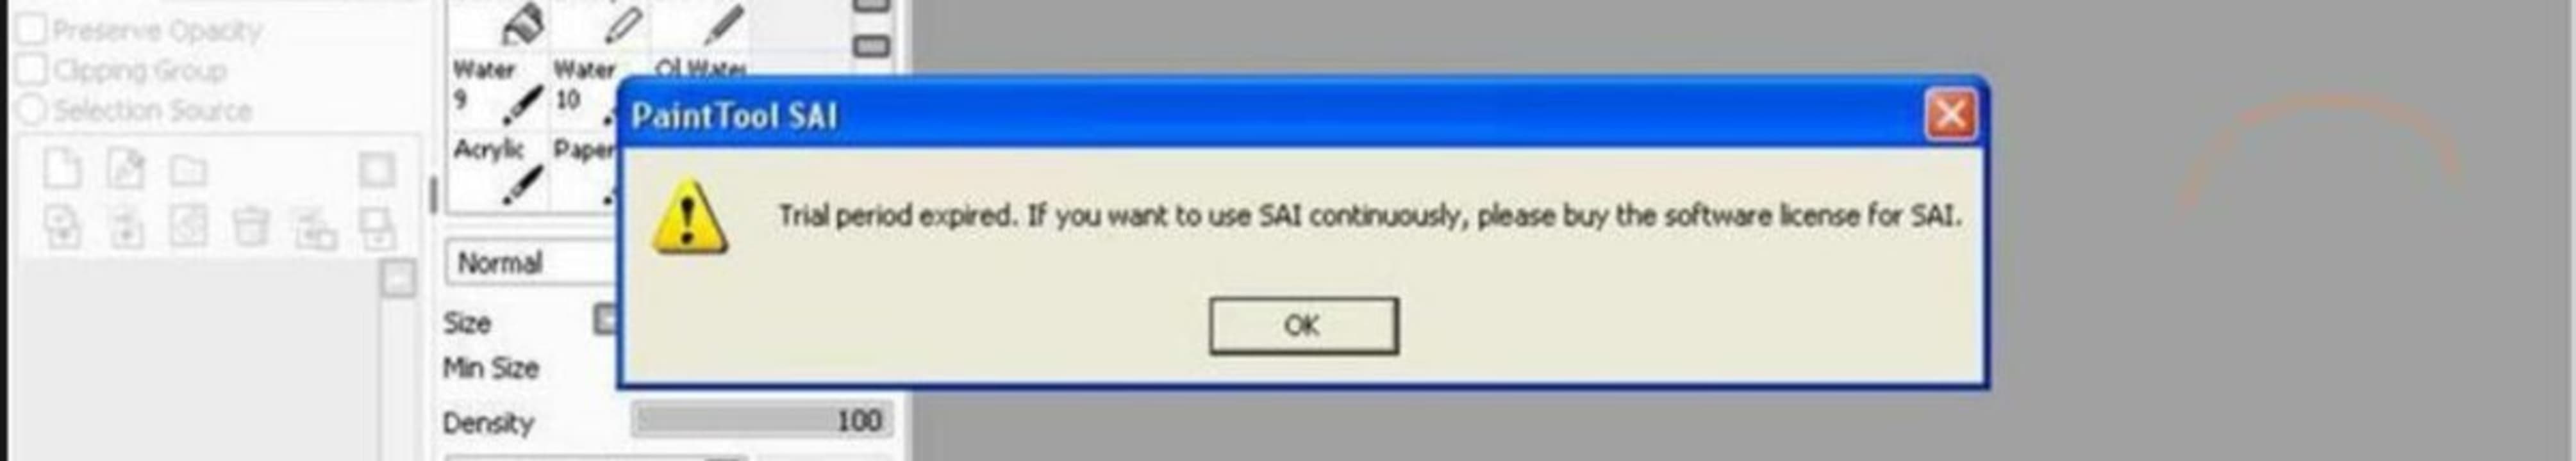 The free trial ends with this message in a dialog box